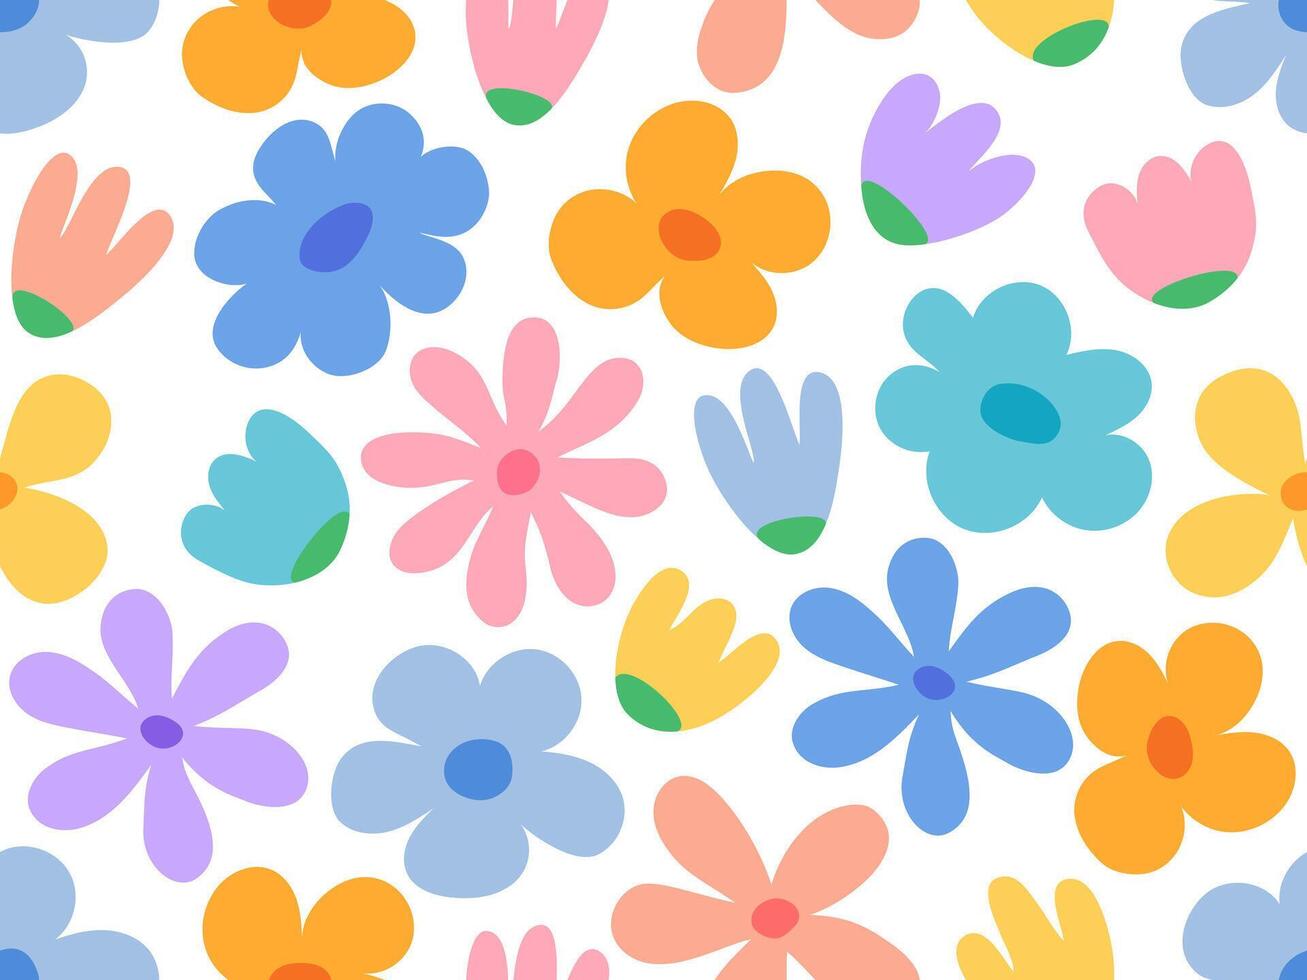 Bright flower seamless pattern. Colorful floral seamless vector background. Funny pattern with different flowers.